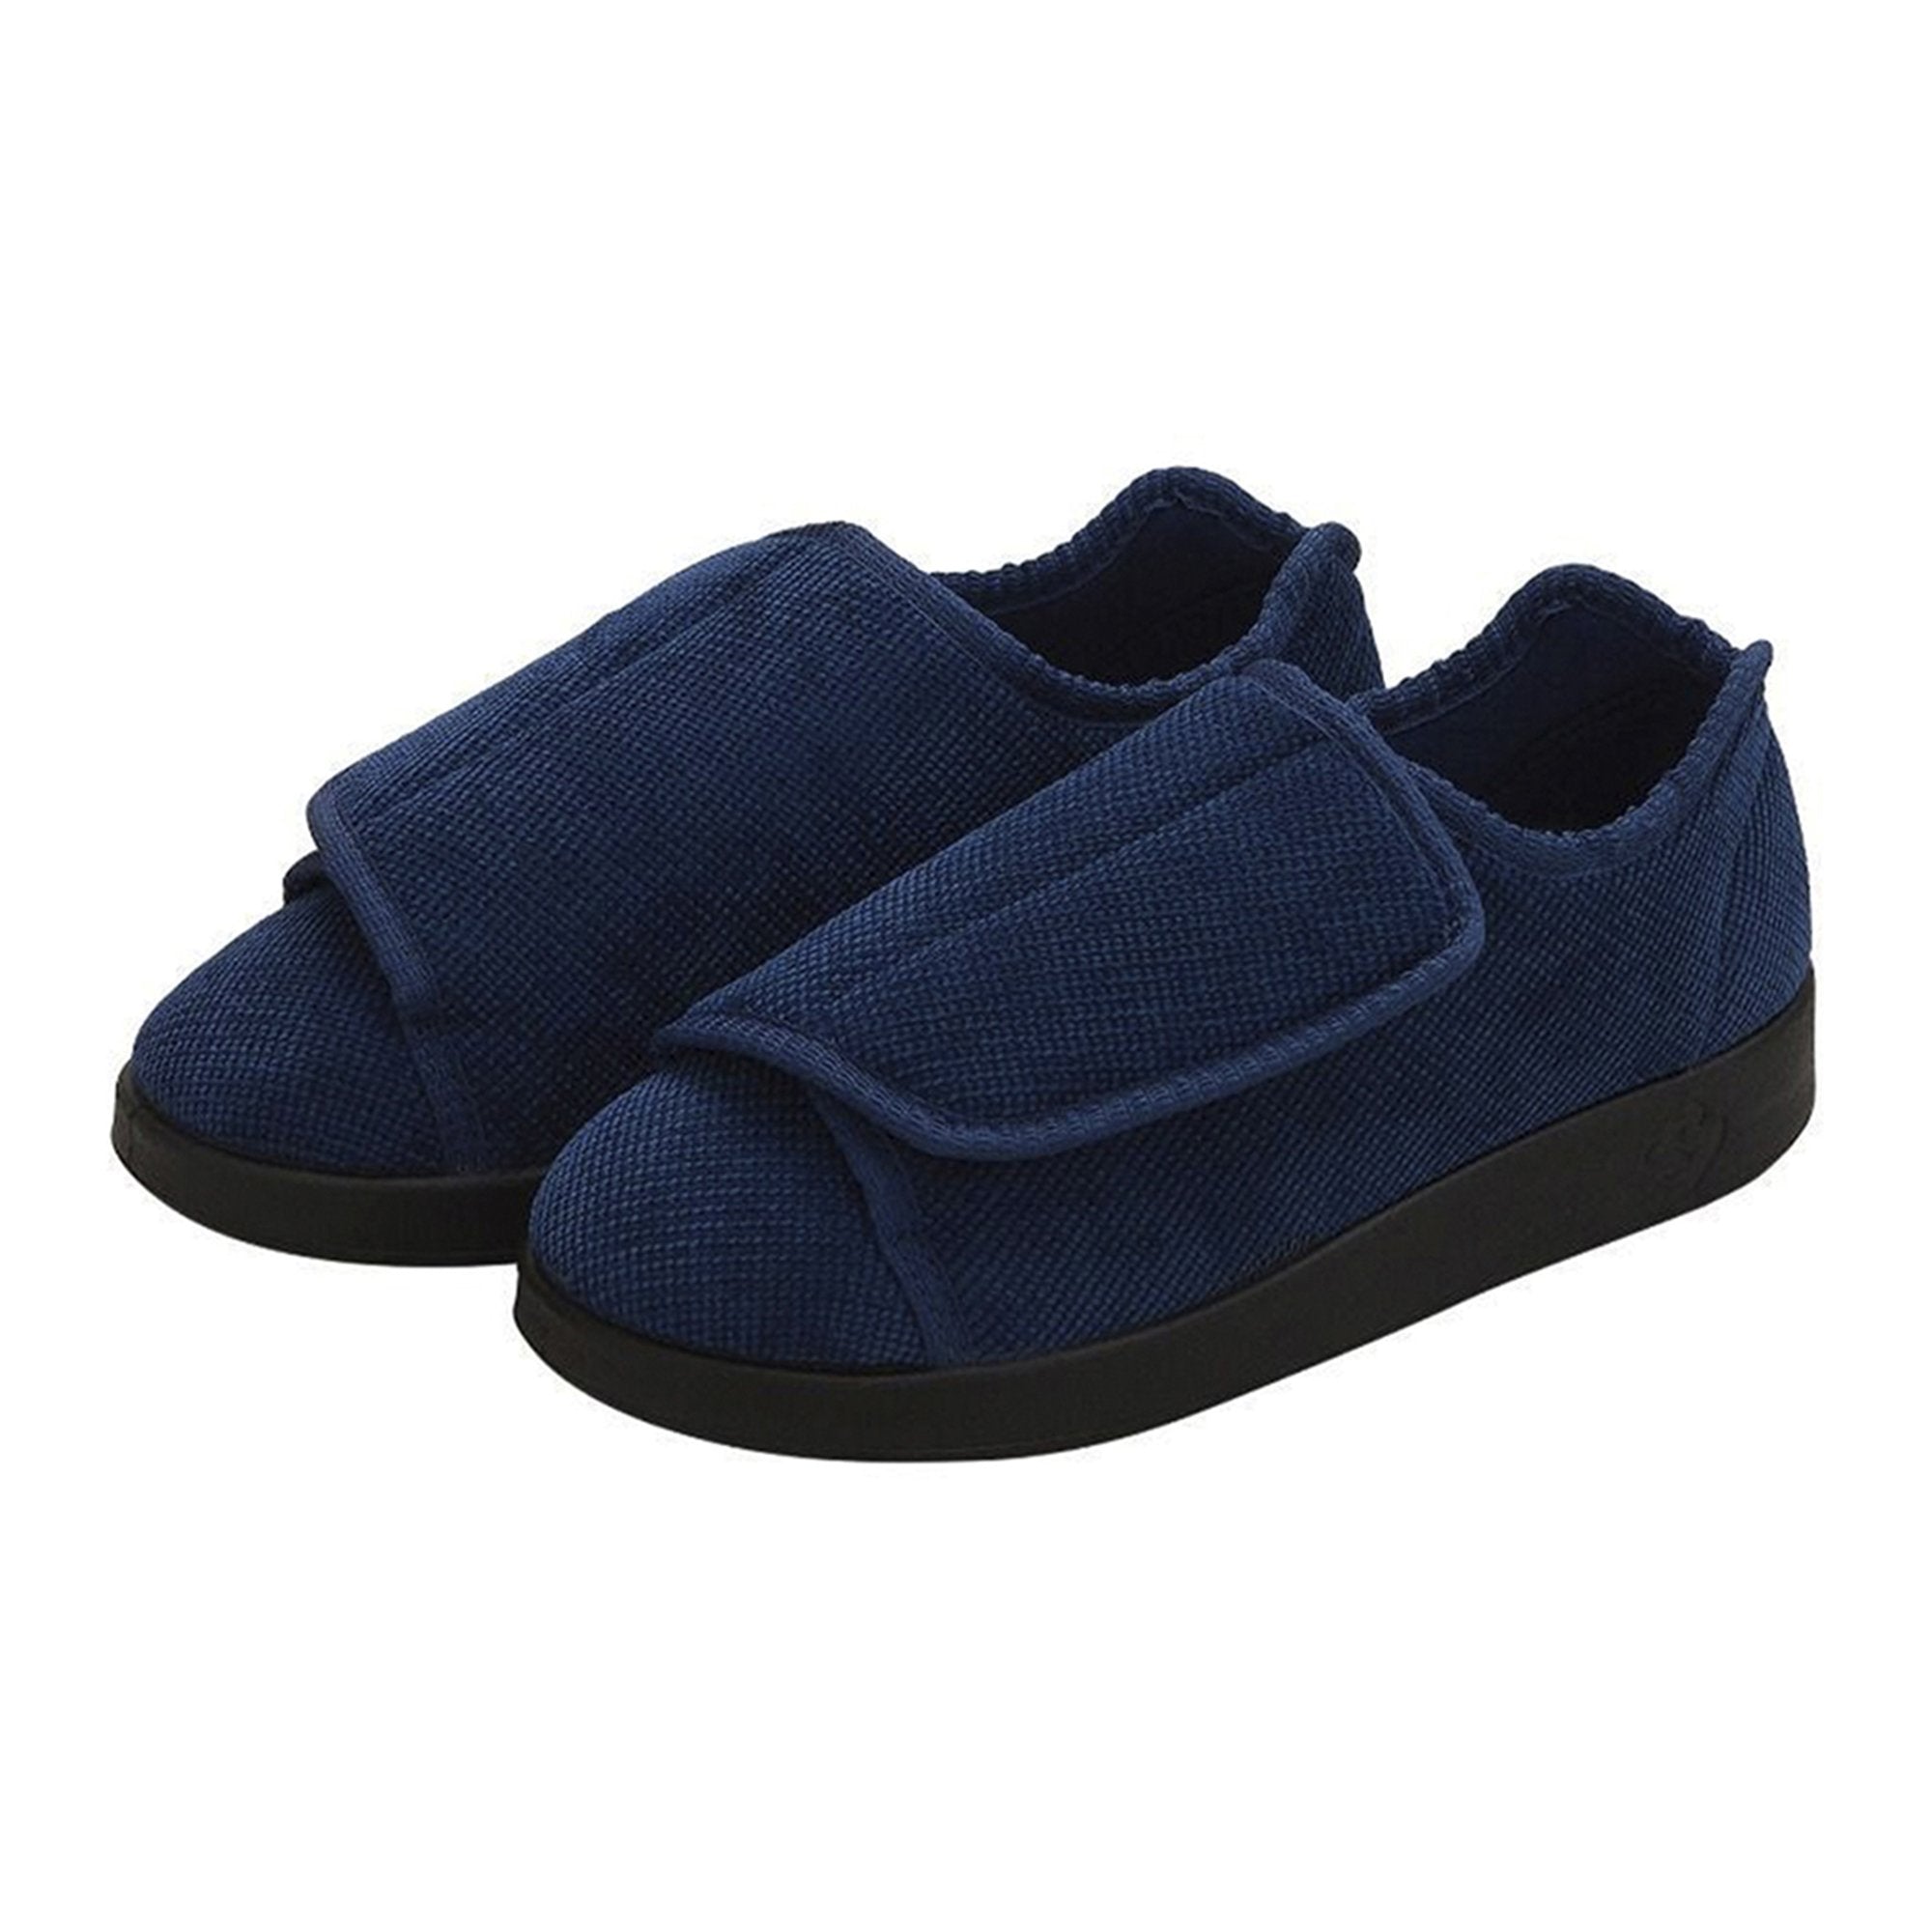 Slippers Silverts® Size 12 / 2X-Wide Navy Blue Easy Closure